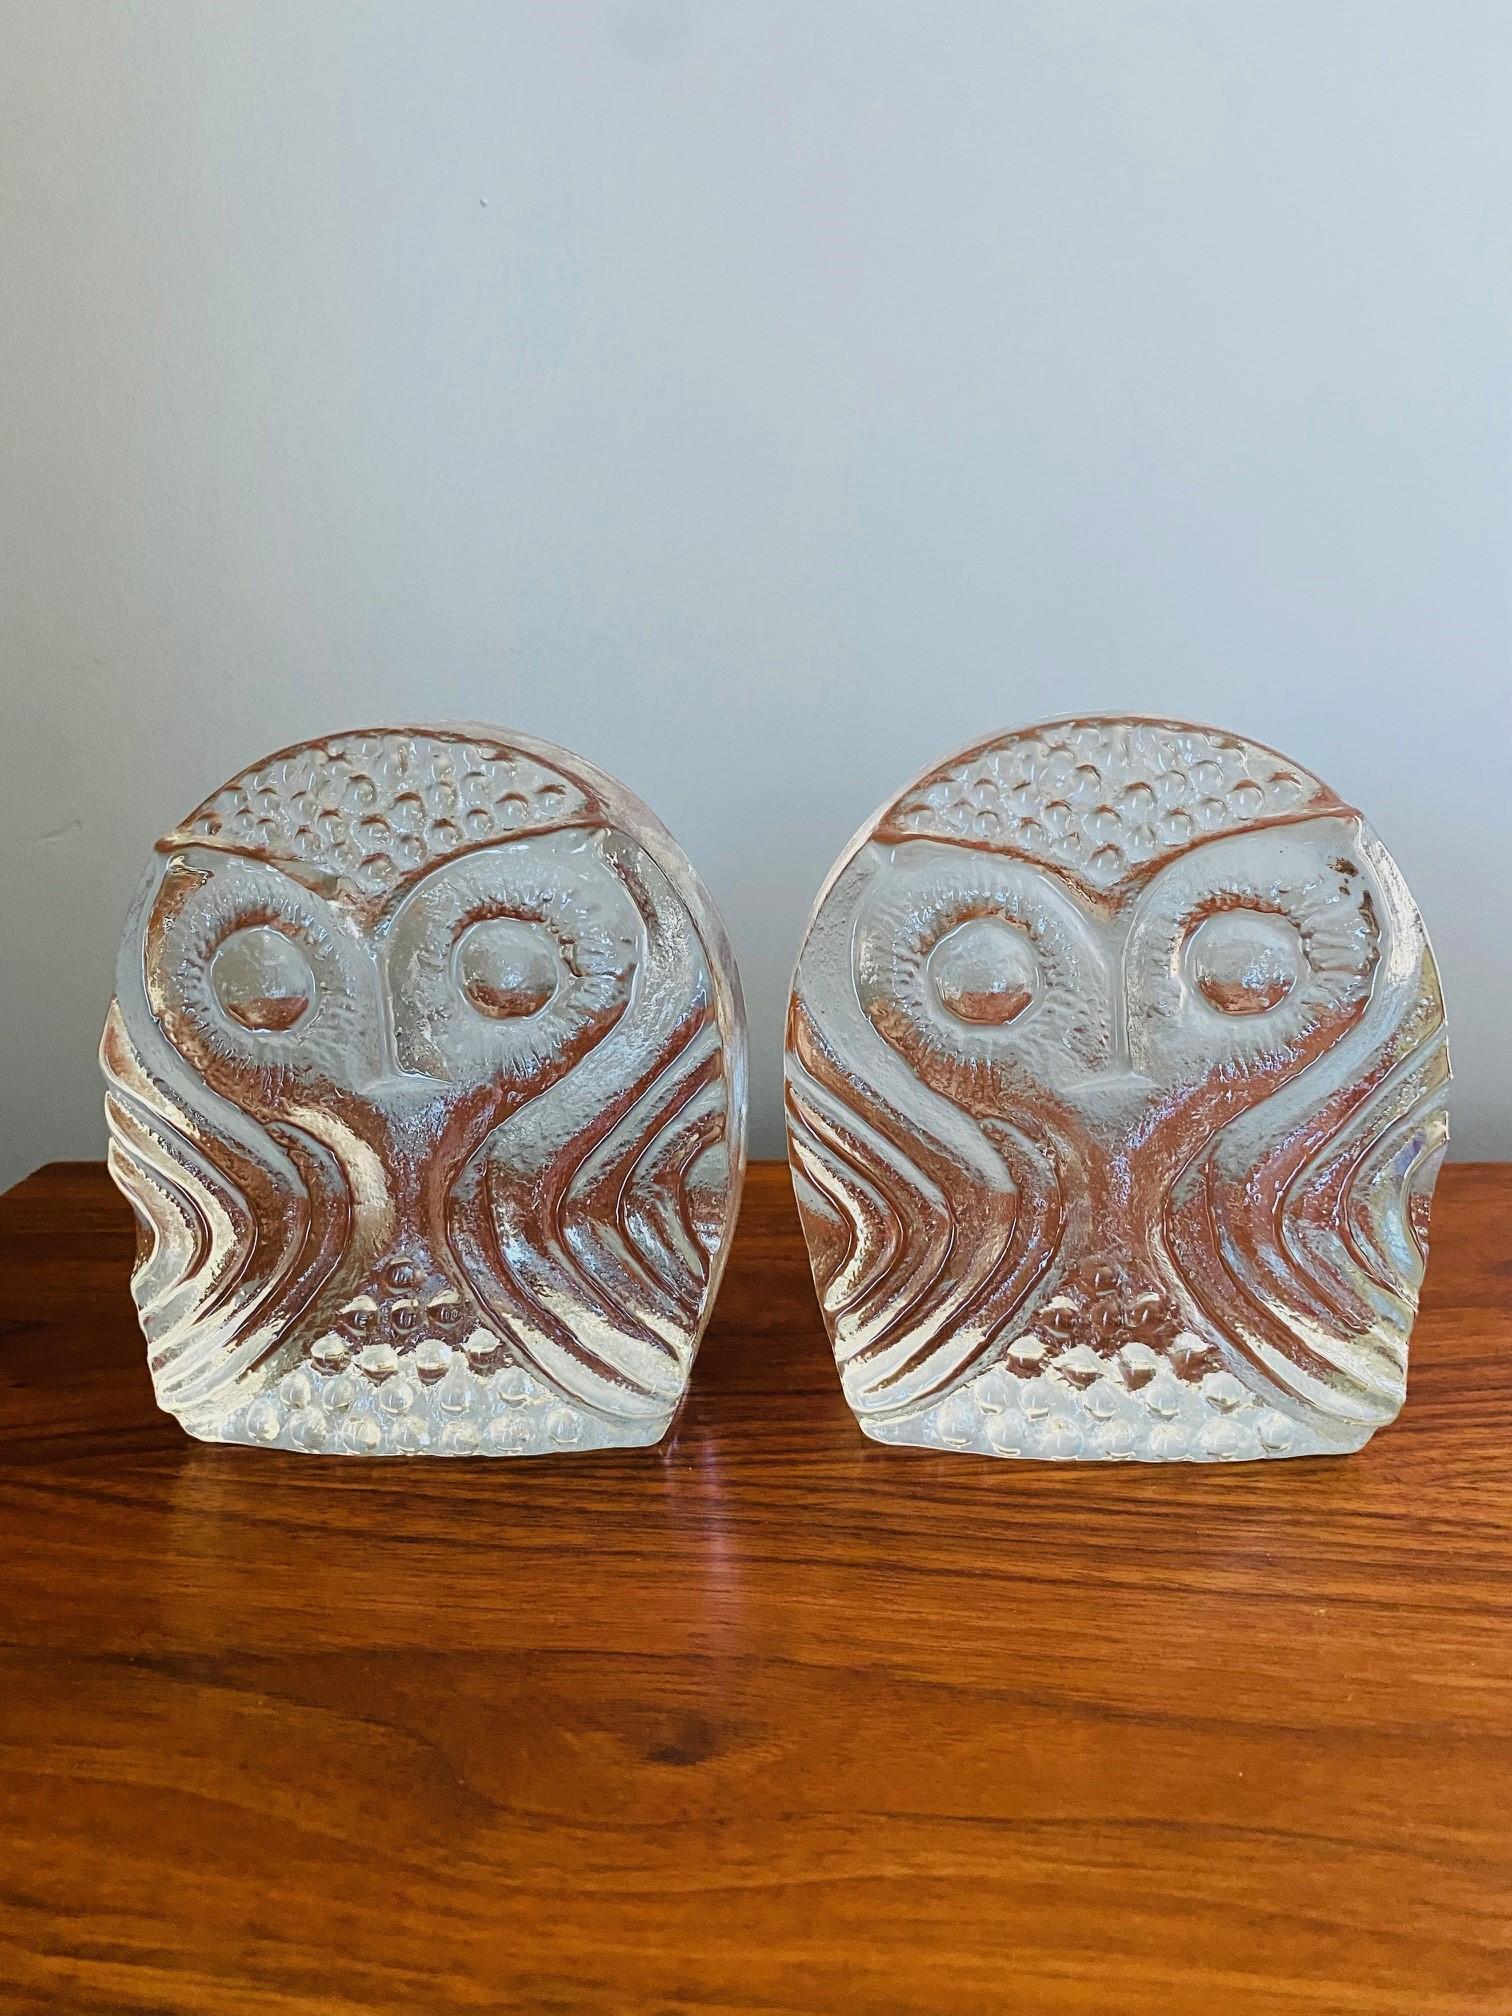 20th Century Vintage Midcentury Glass Owl Bookends by Blenko For Sale